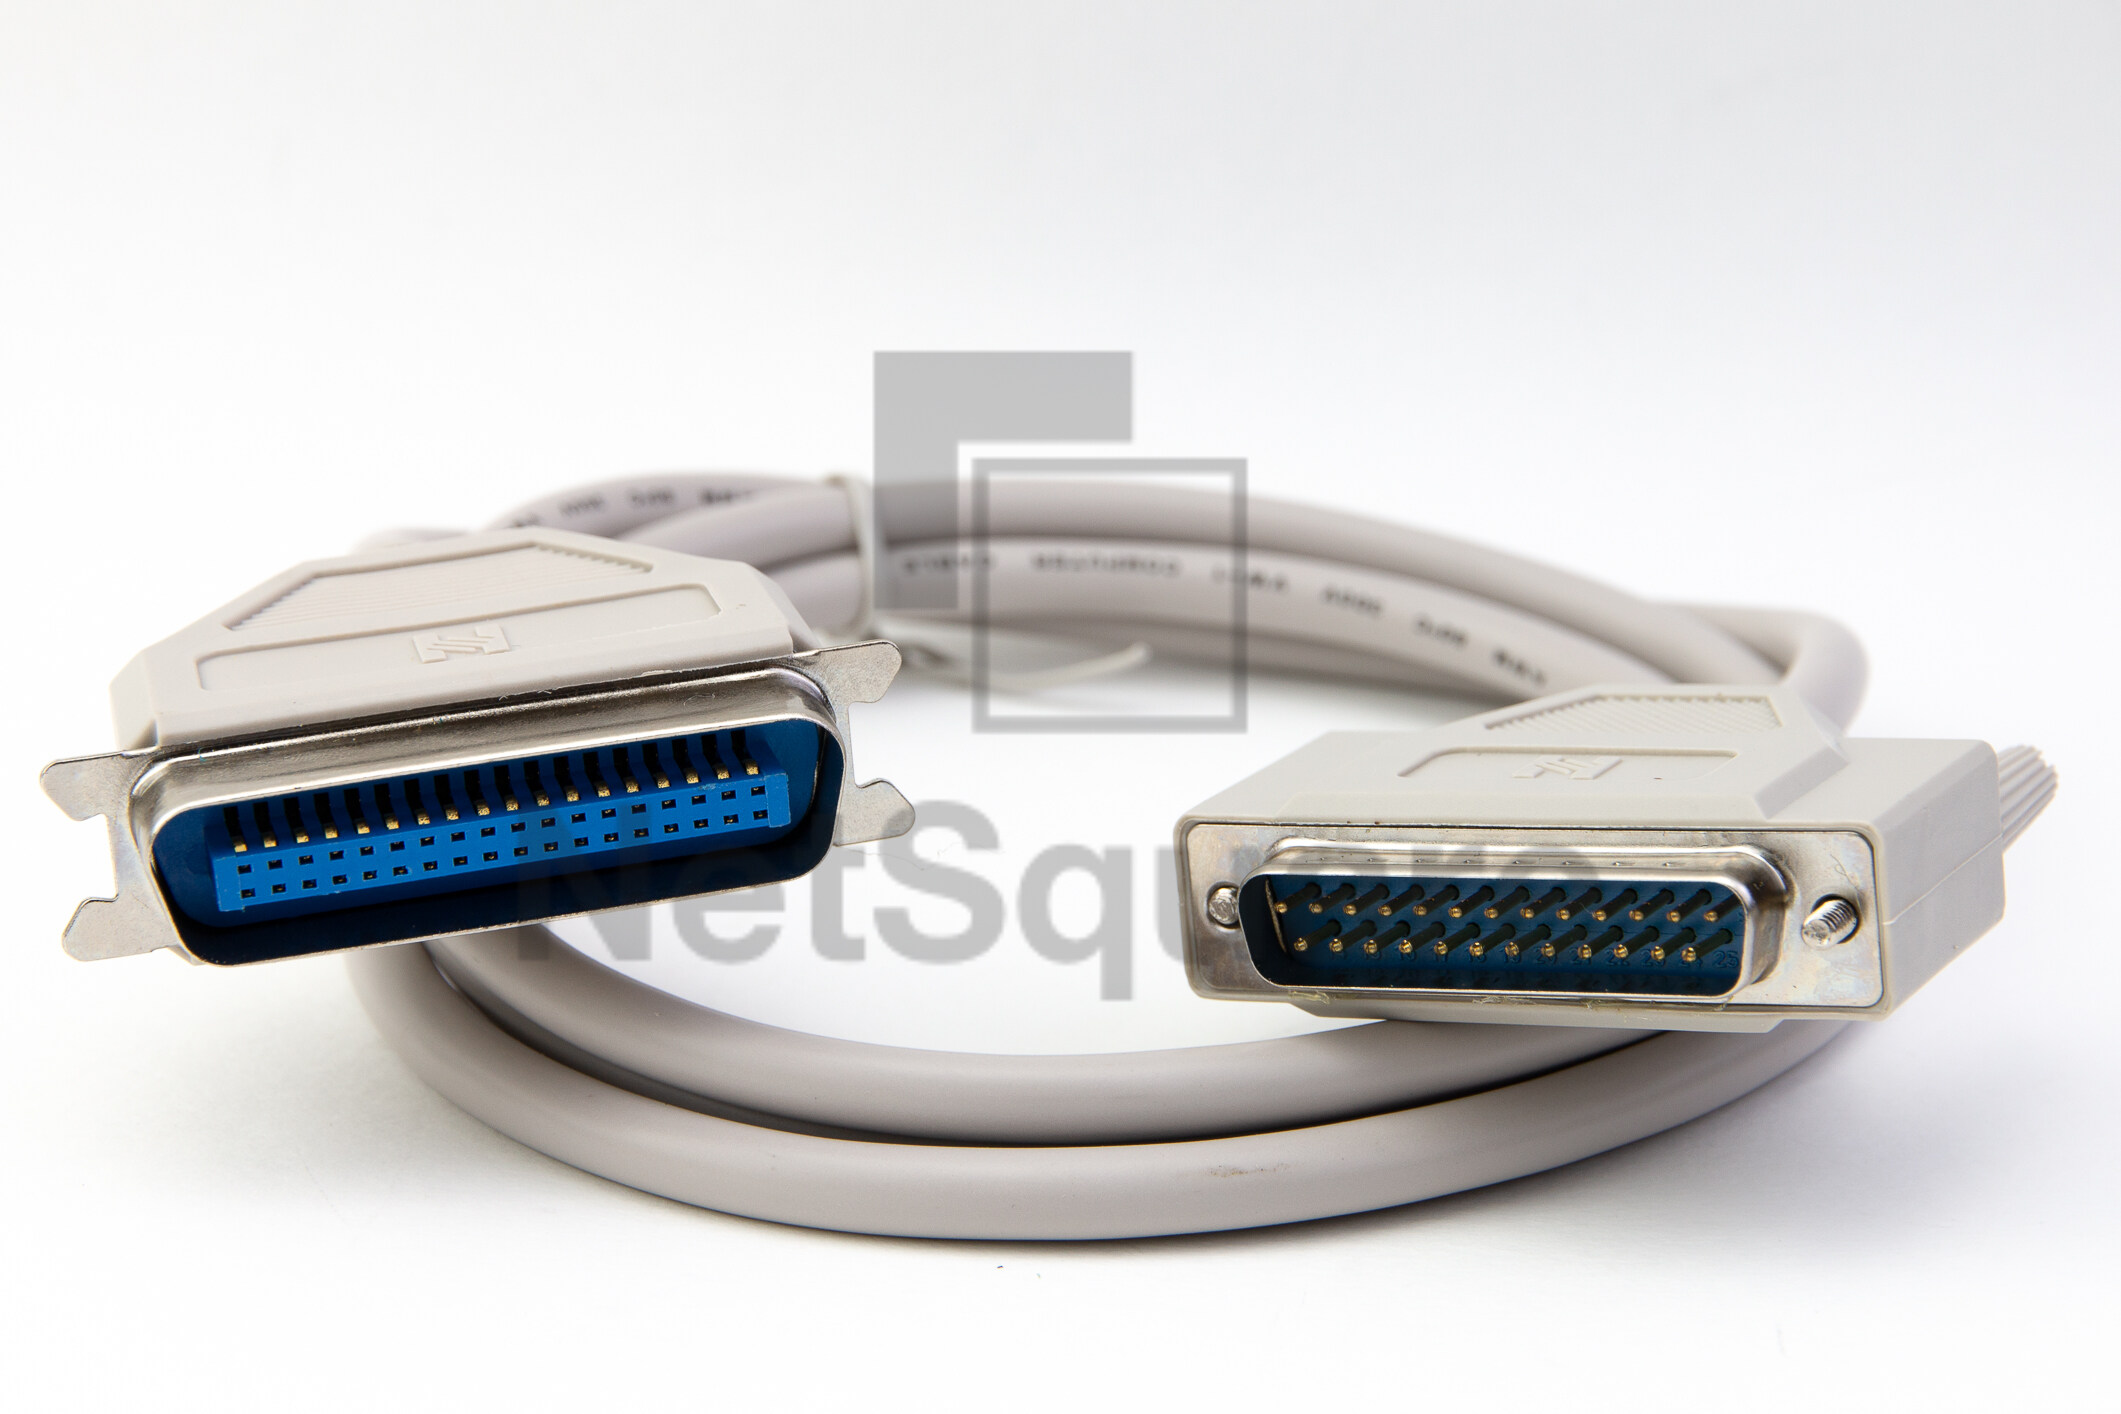 25-Pin Type-A to 36-Pin Type-B Type-B DB25 IEEE 1284 Centronic Parallel Printer Cable 1.5m